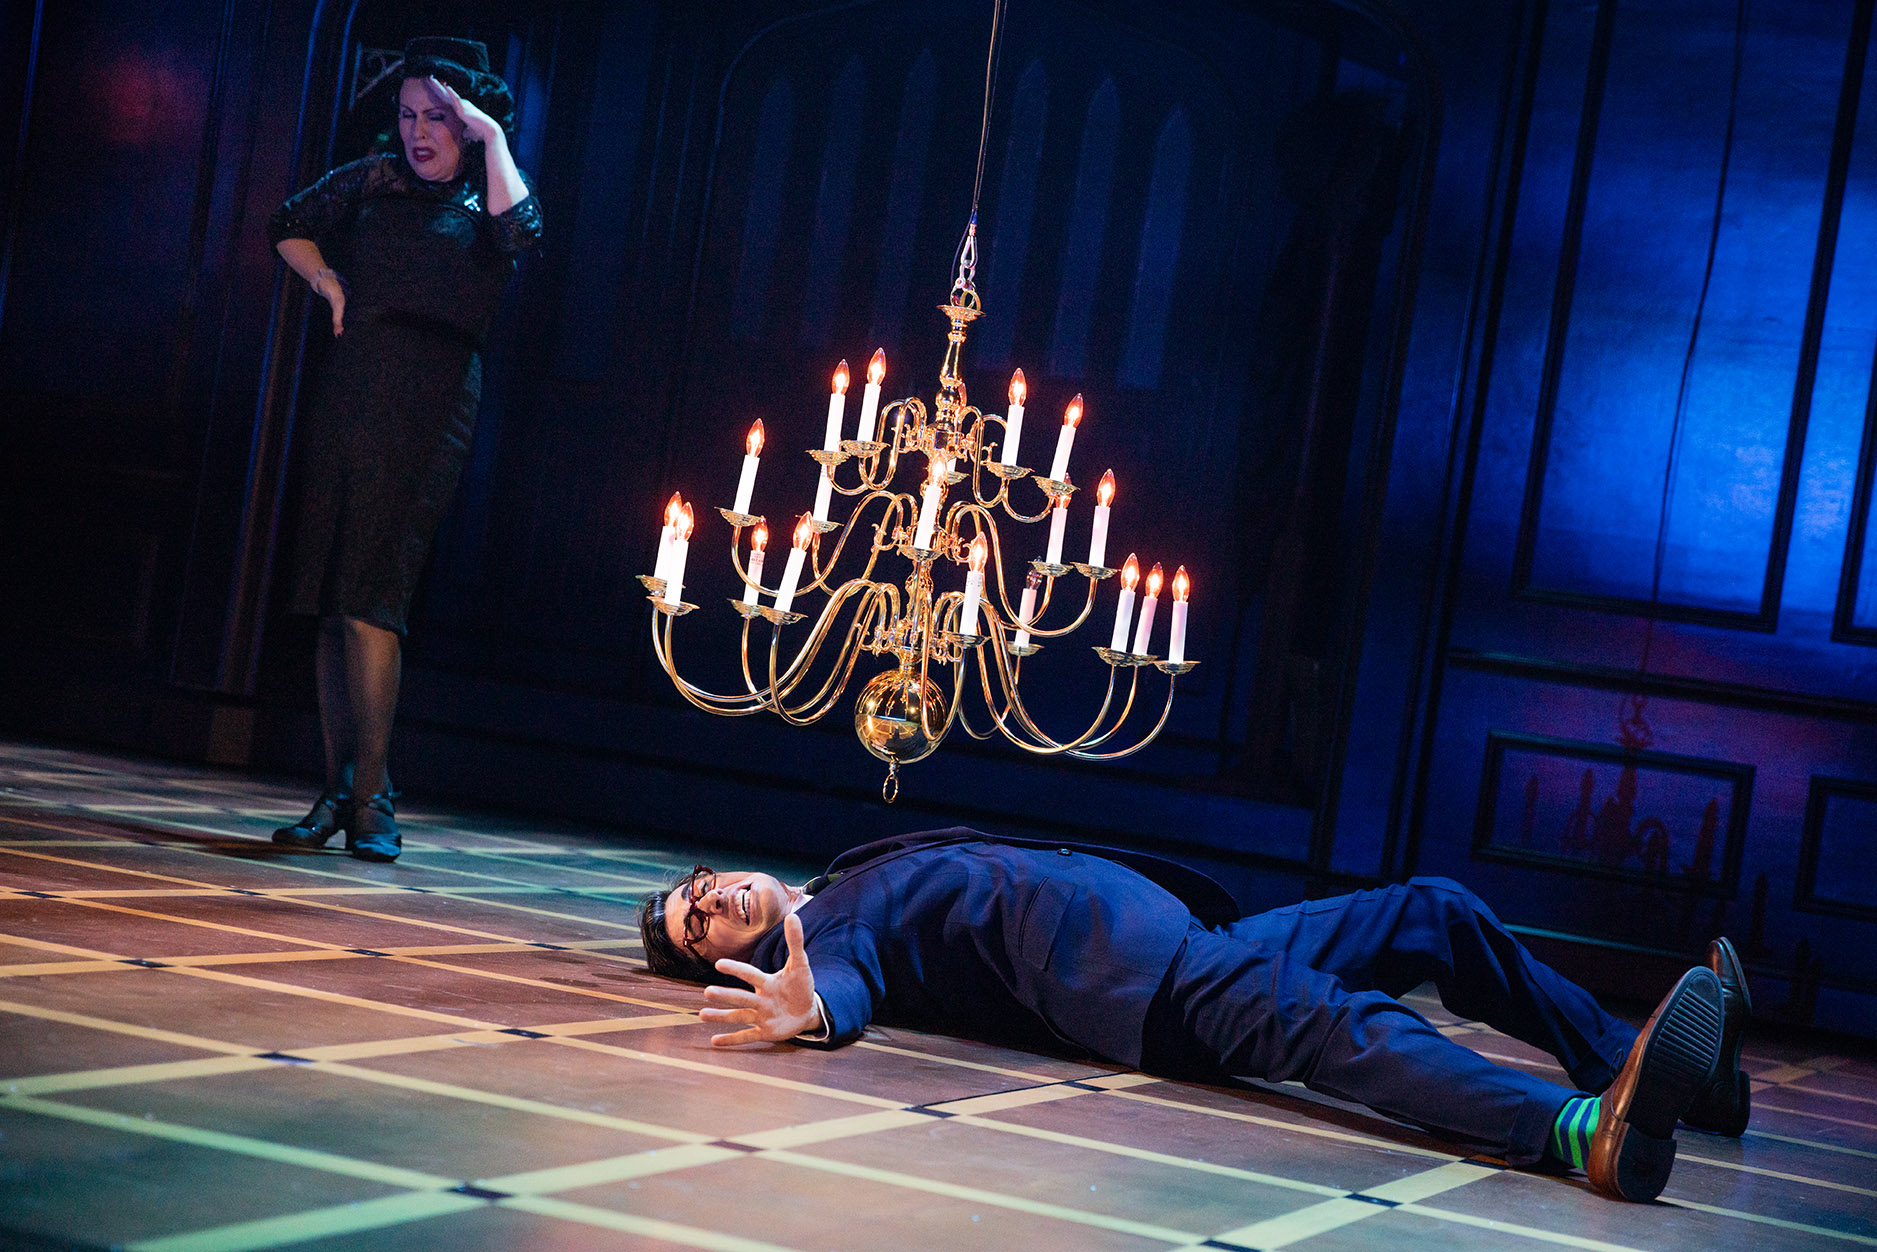 John Shartzer and Tari Kelly in the North American tour of CLUE - photo by Evan Zimmerman for MurphyMade<br><br>A man is lying spread out on the floor, mouth agape as a falling chandelier hangs over him. A woman in all black stands in the foreground with her hand covering her eyes. 